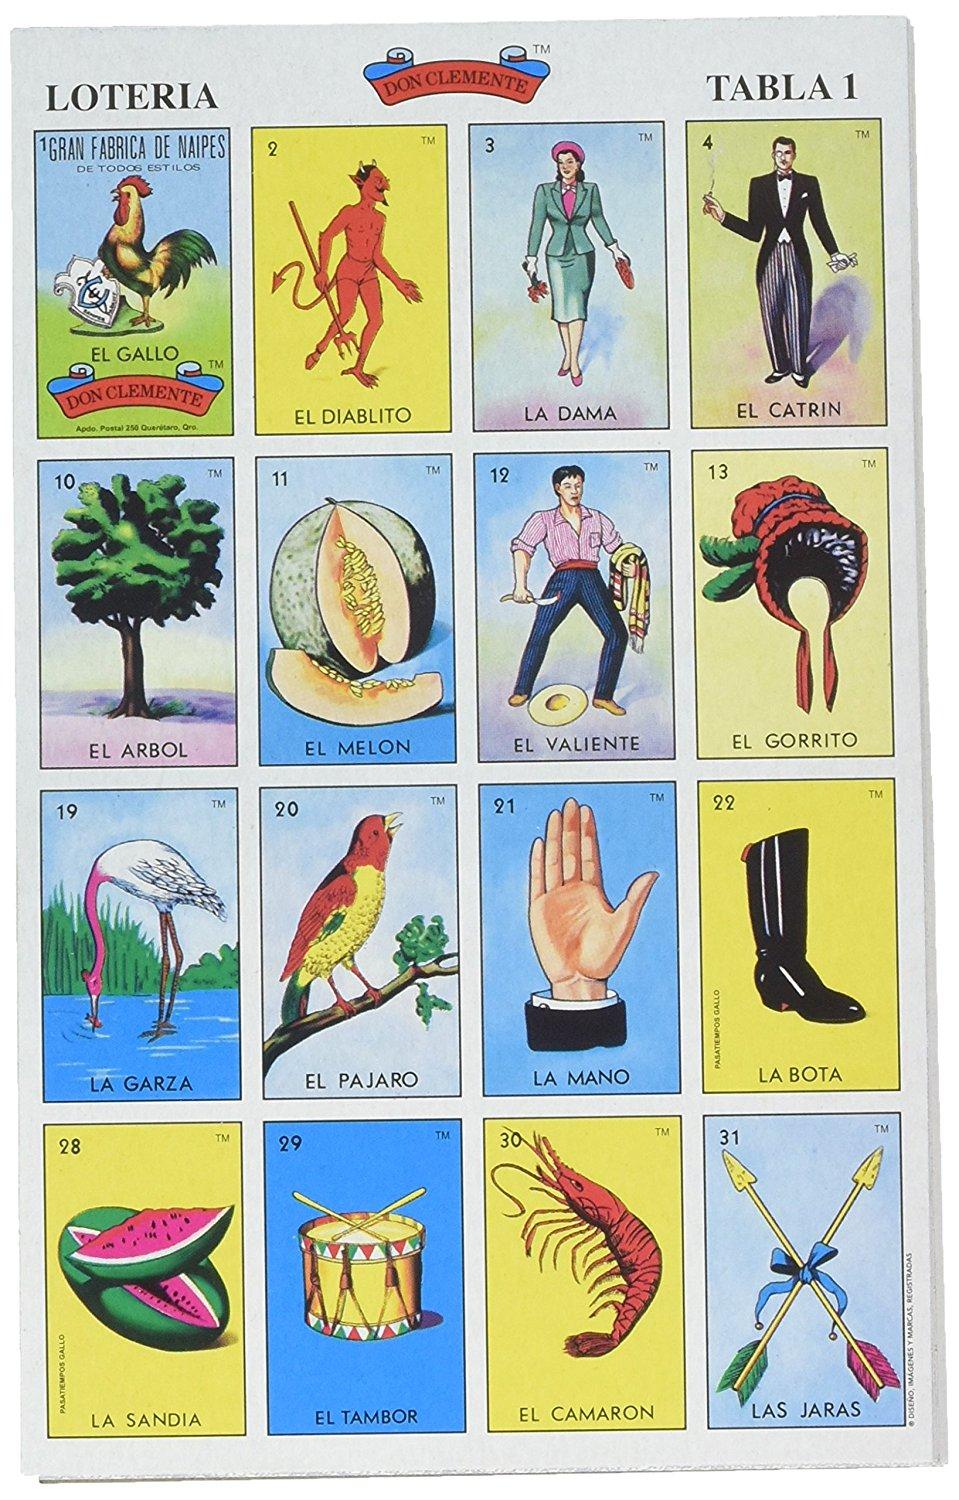 Lotería Lotería is a game like bingo, but played with cards and images instead of numbers.